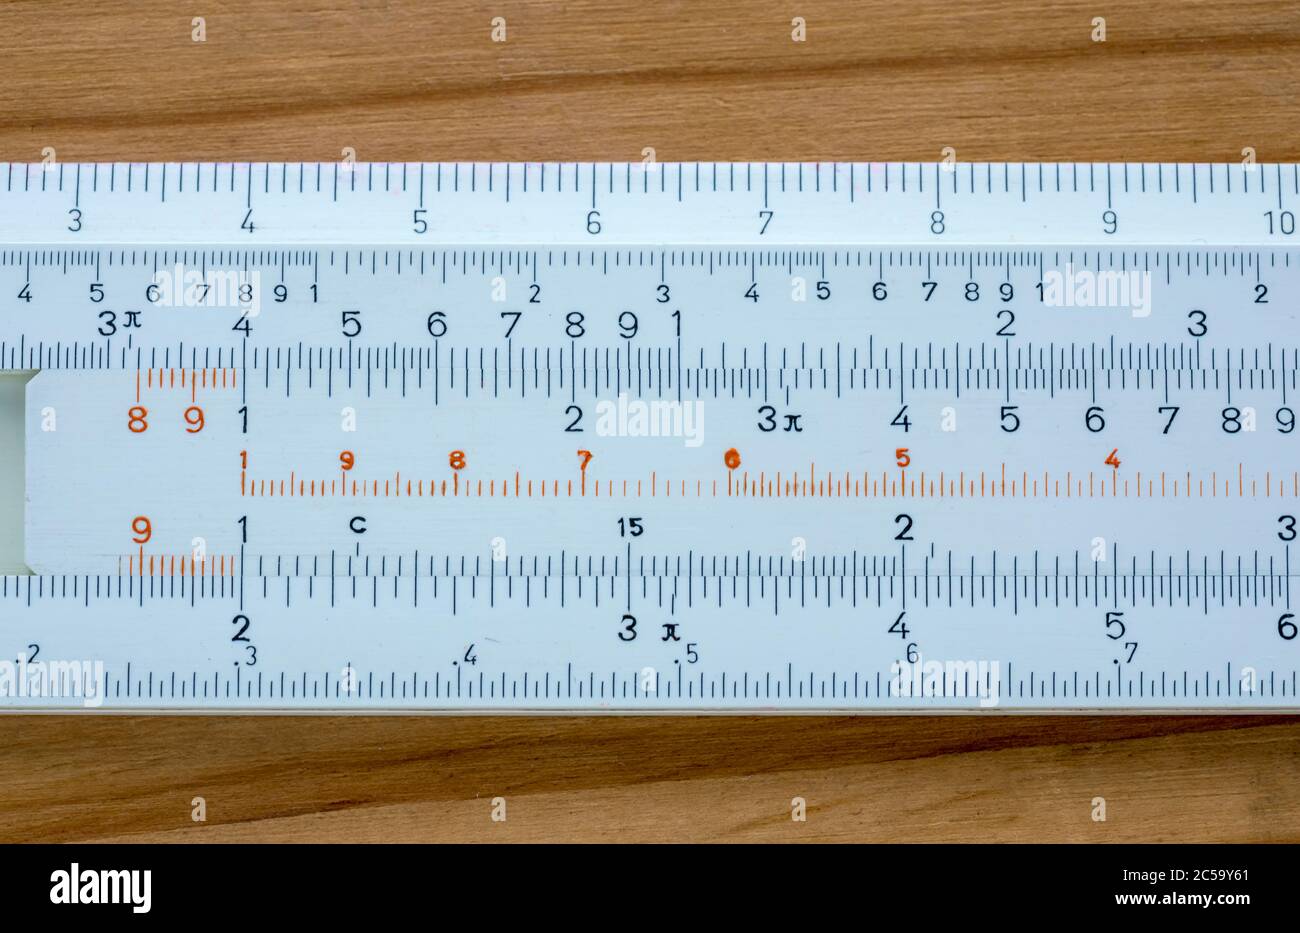 SCIENCE, MATHEMATICS, CALCULATIONS, sliderule, predecessor of the electronic calculator. The *2 multiplication, and the /2 division are shown. Stock Photo